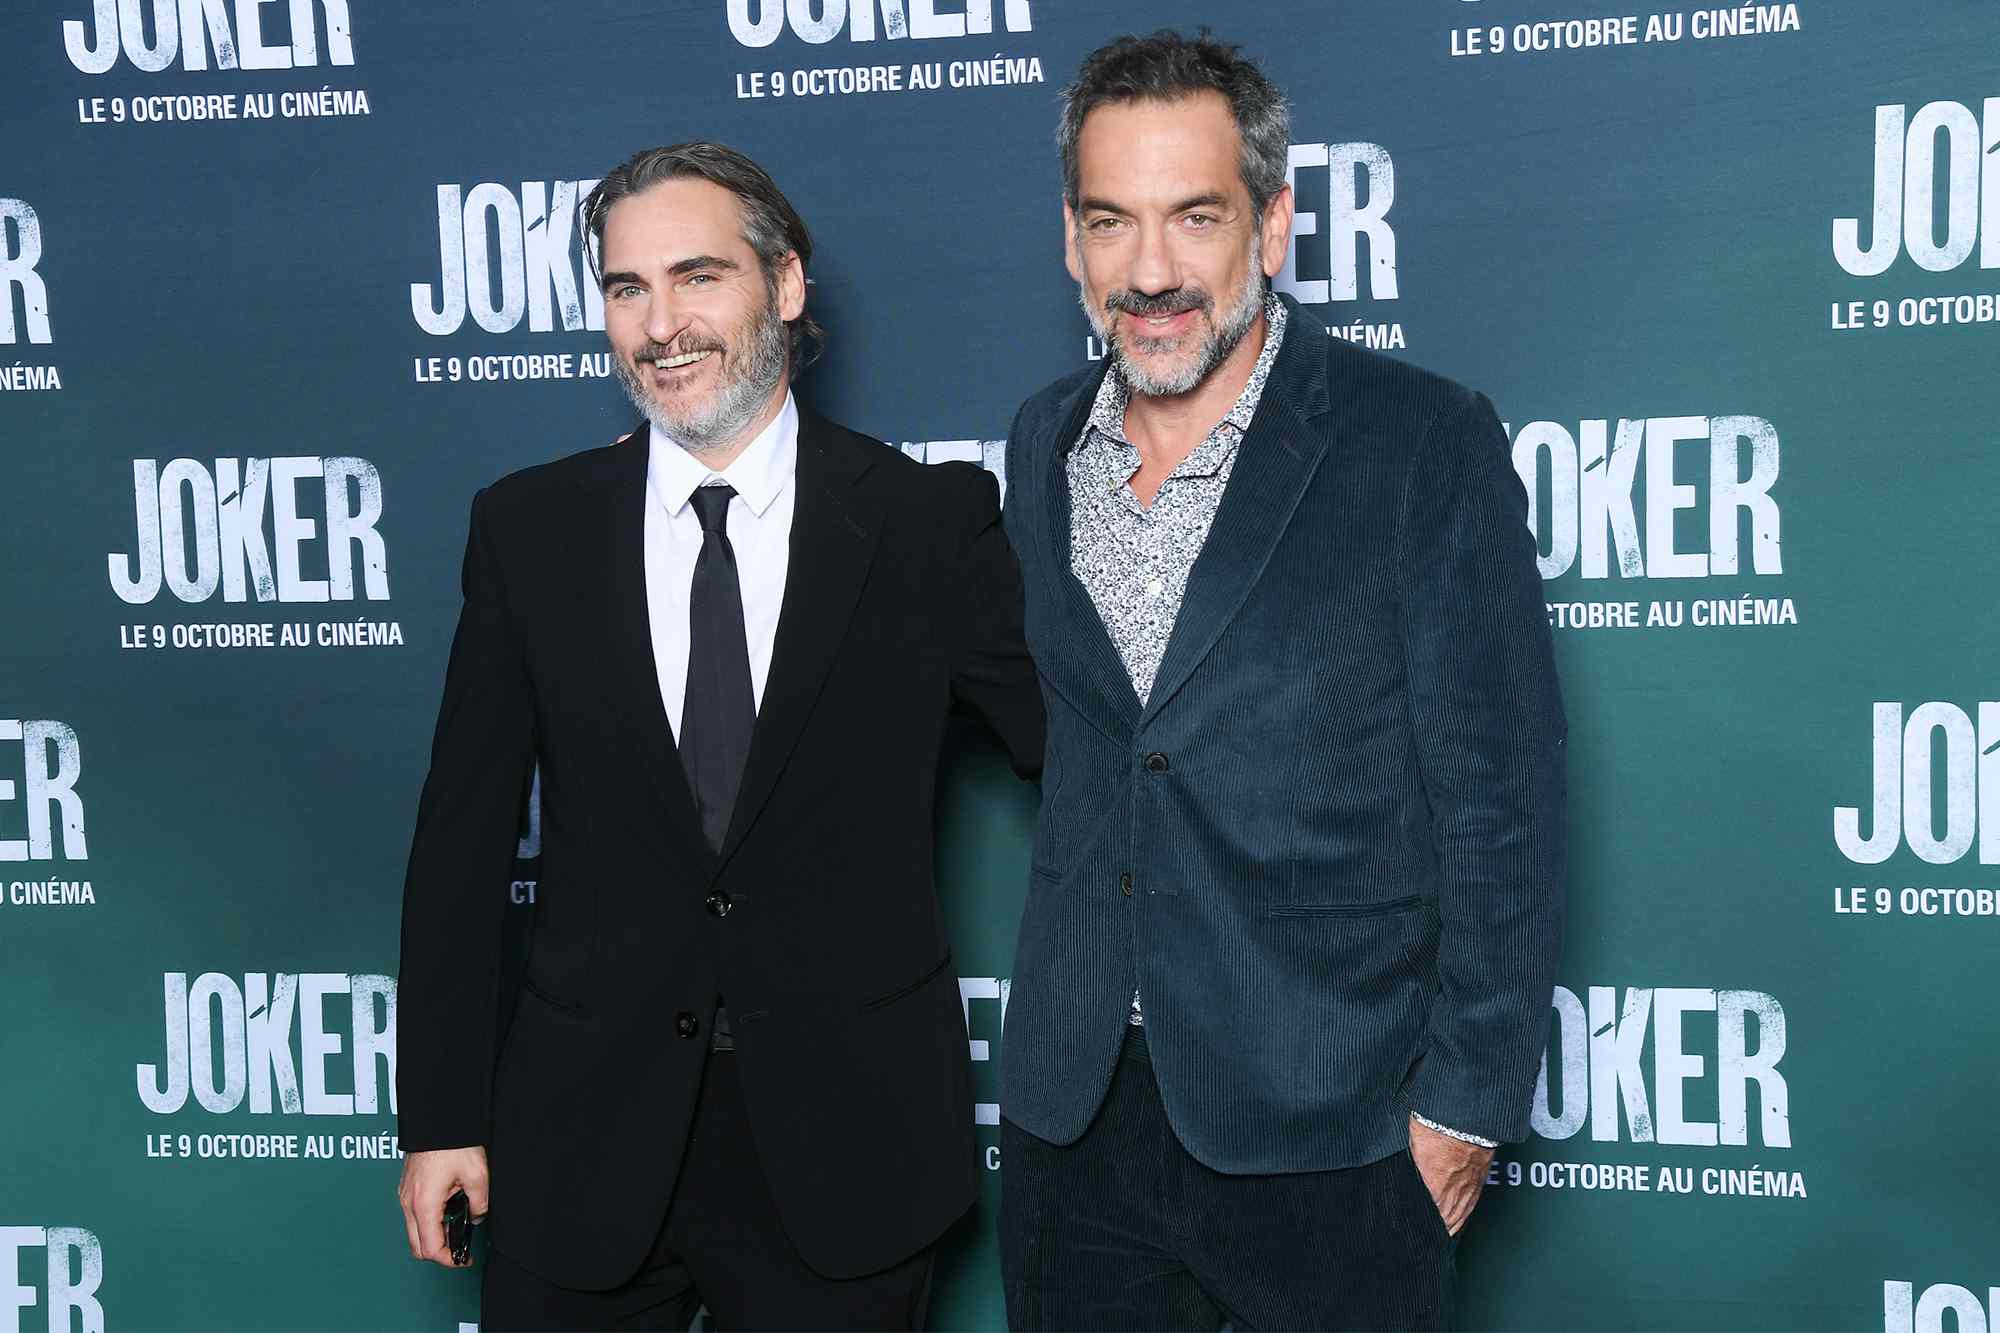 Joaquin Phoenix and Director Todd Phillips attend the "Joker" Premiere at cinema UGC Normandie son September 23, 2019 in Paris, France.